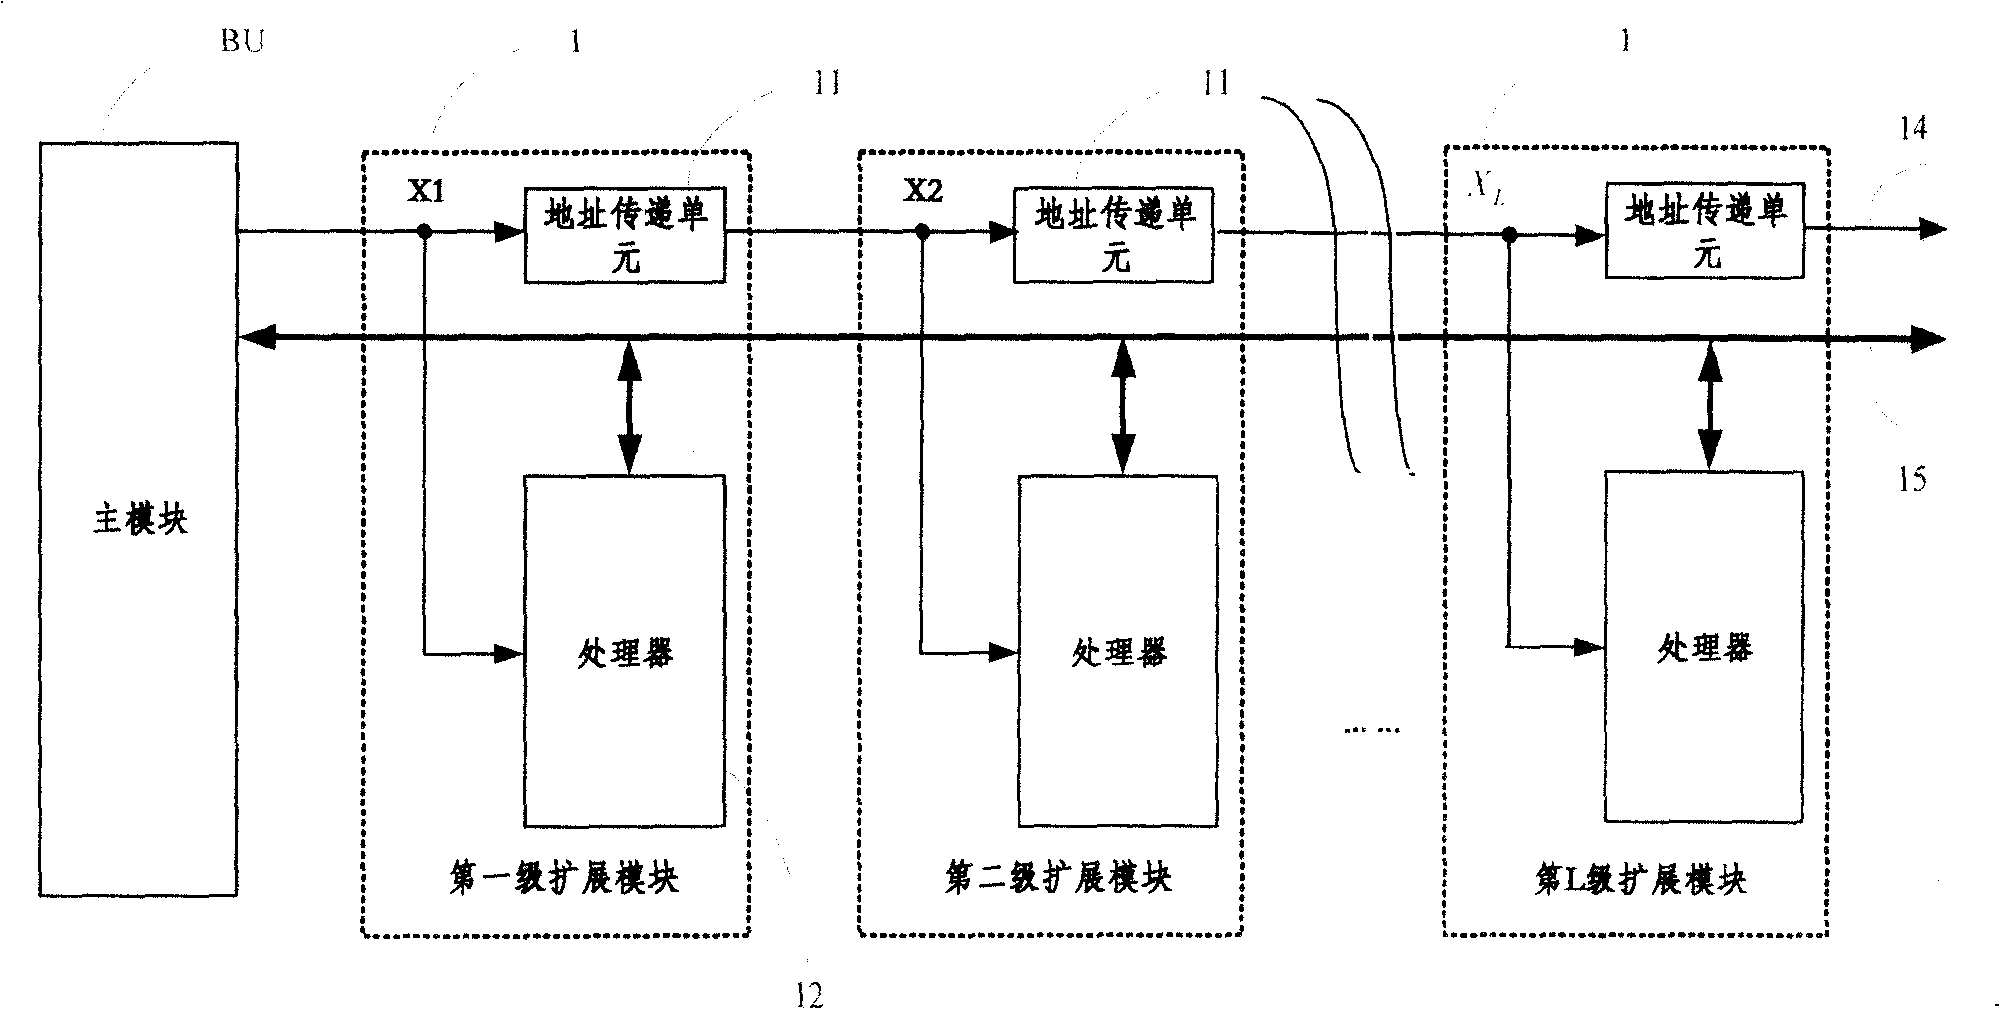 Programmable logical controller, its expanded module and its hardware expanding method